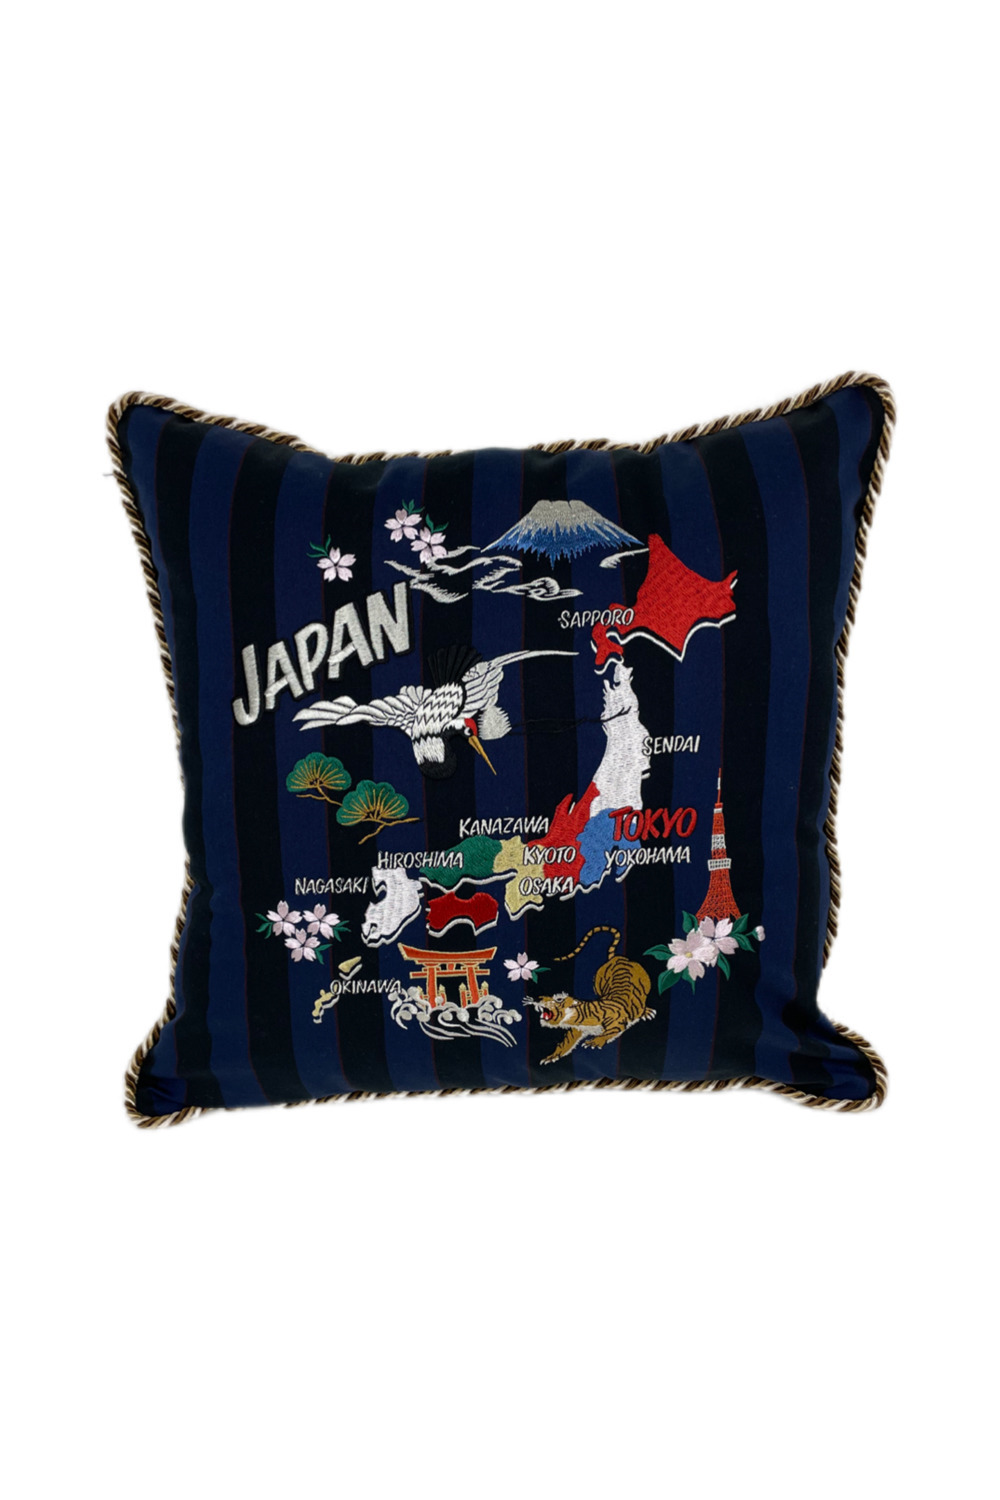 JAPAN Embroidery クッション 詳細画像 ブラック